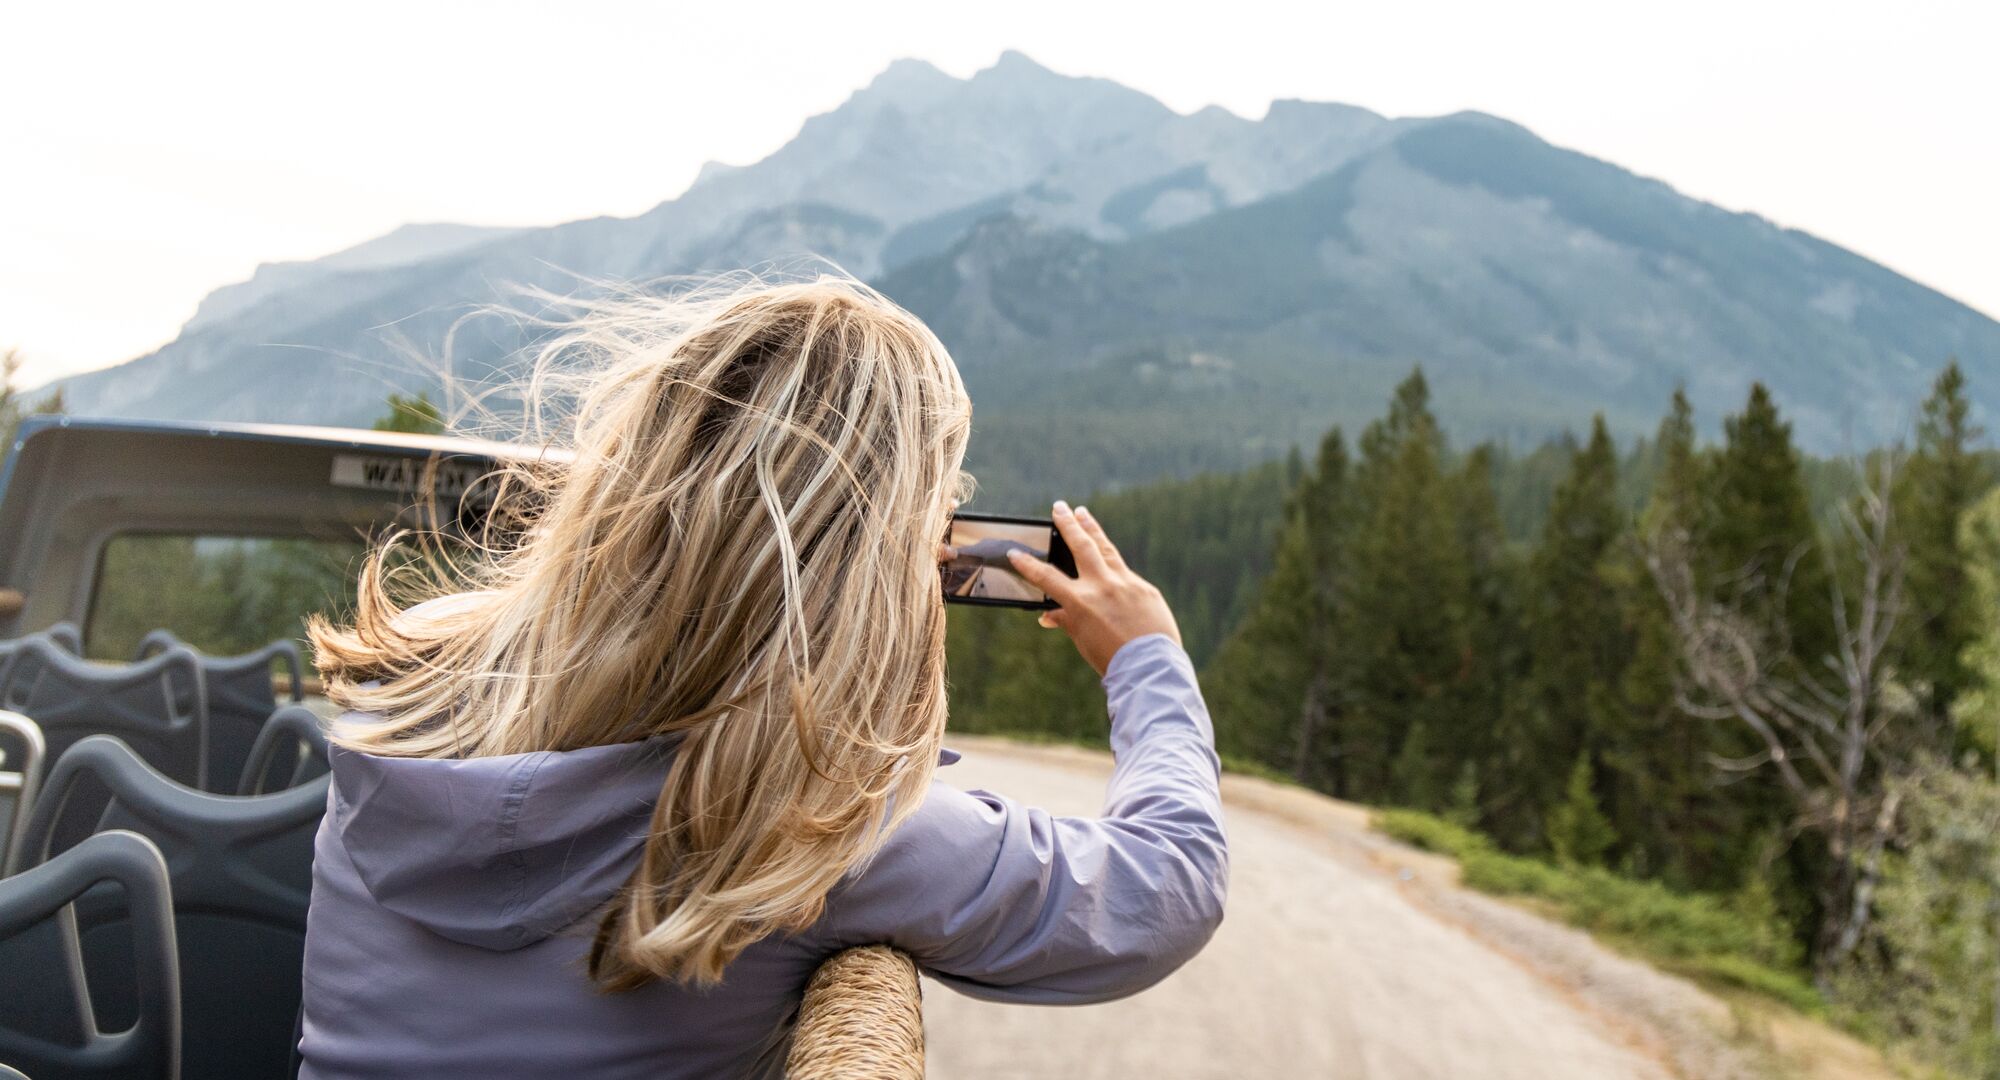 Person on a guided tour in the Banff area, taking a photo from the top of a open top bus